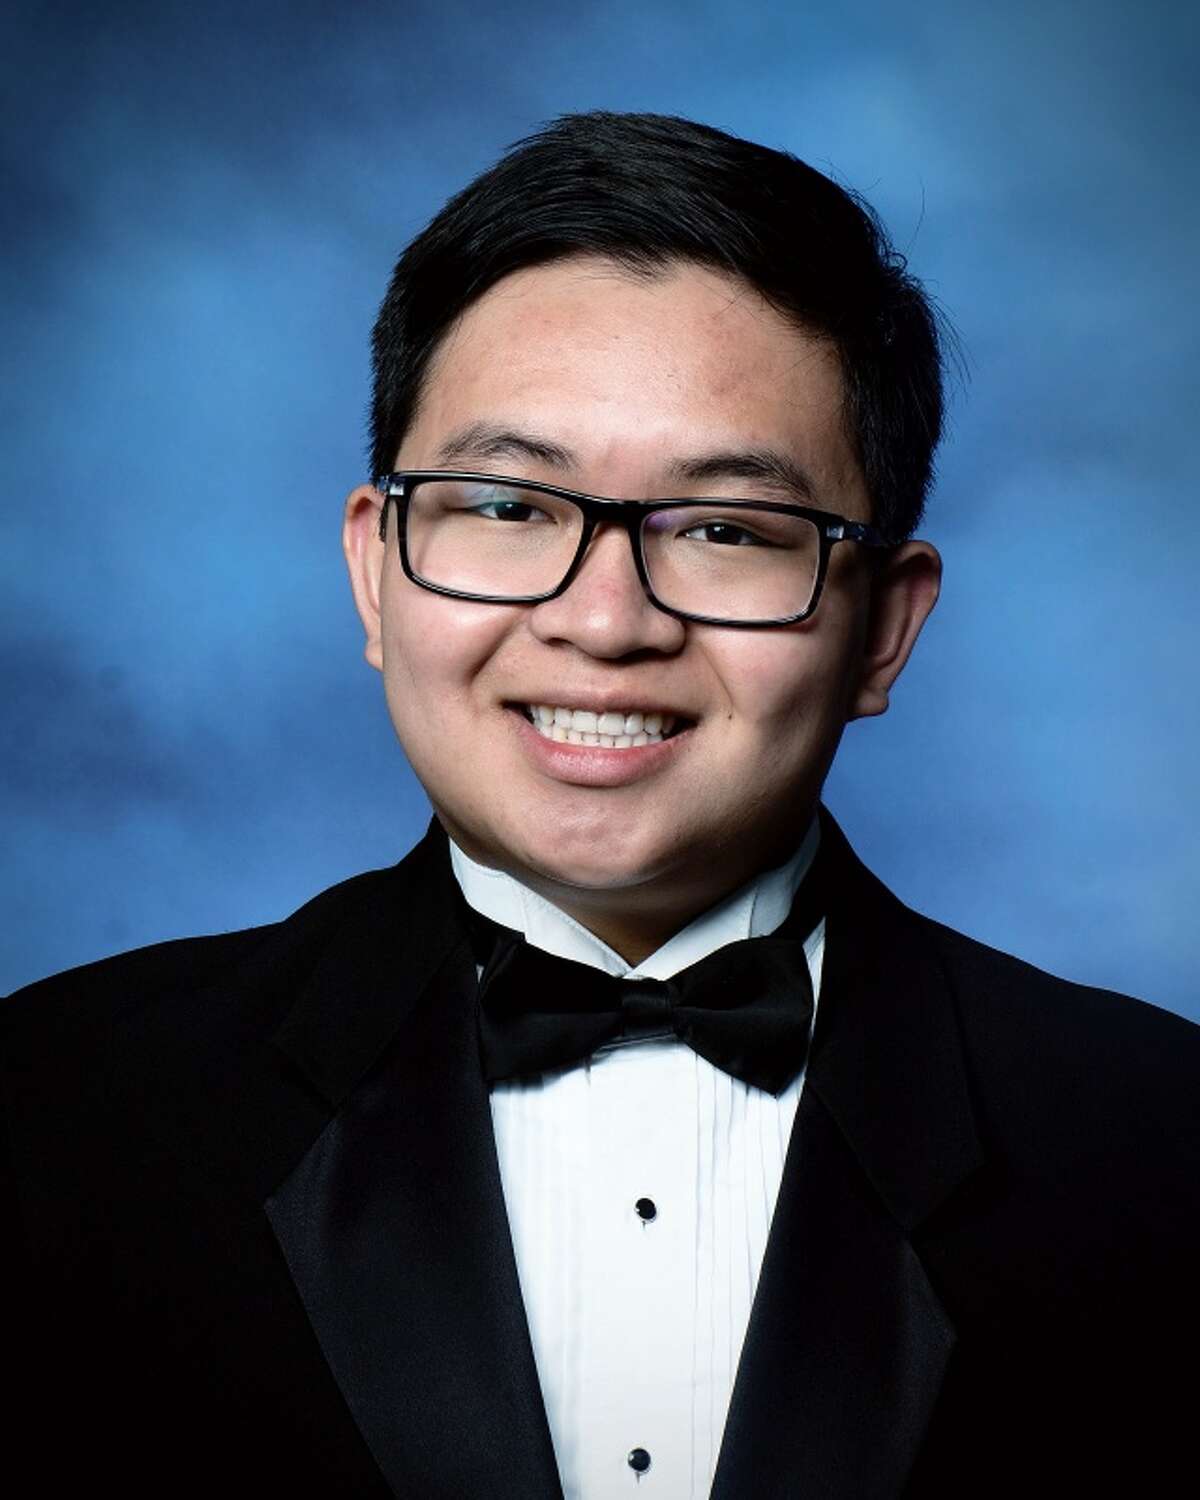 Valedictorian Jonathan Huang graduates with a 4.8082. He will attend Harvard University and study molecular and cellular biology.